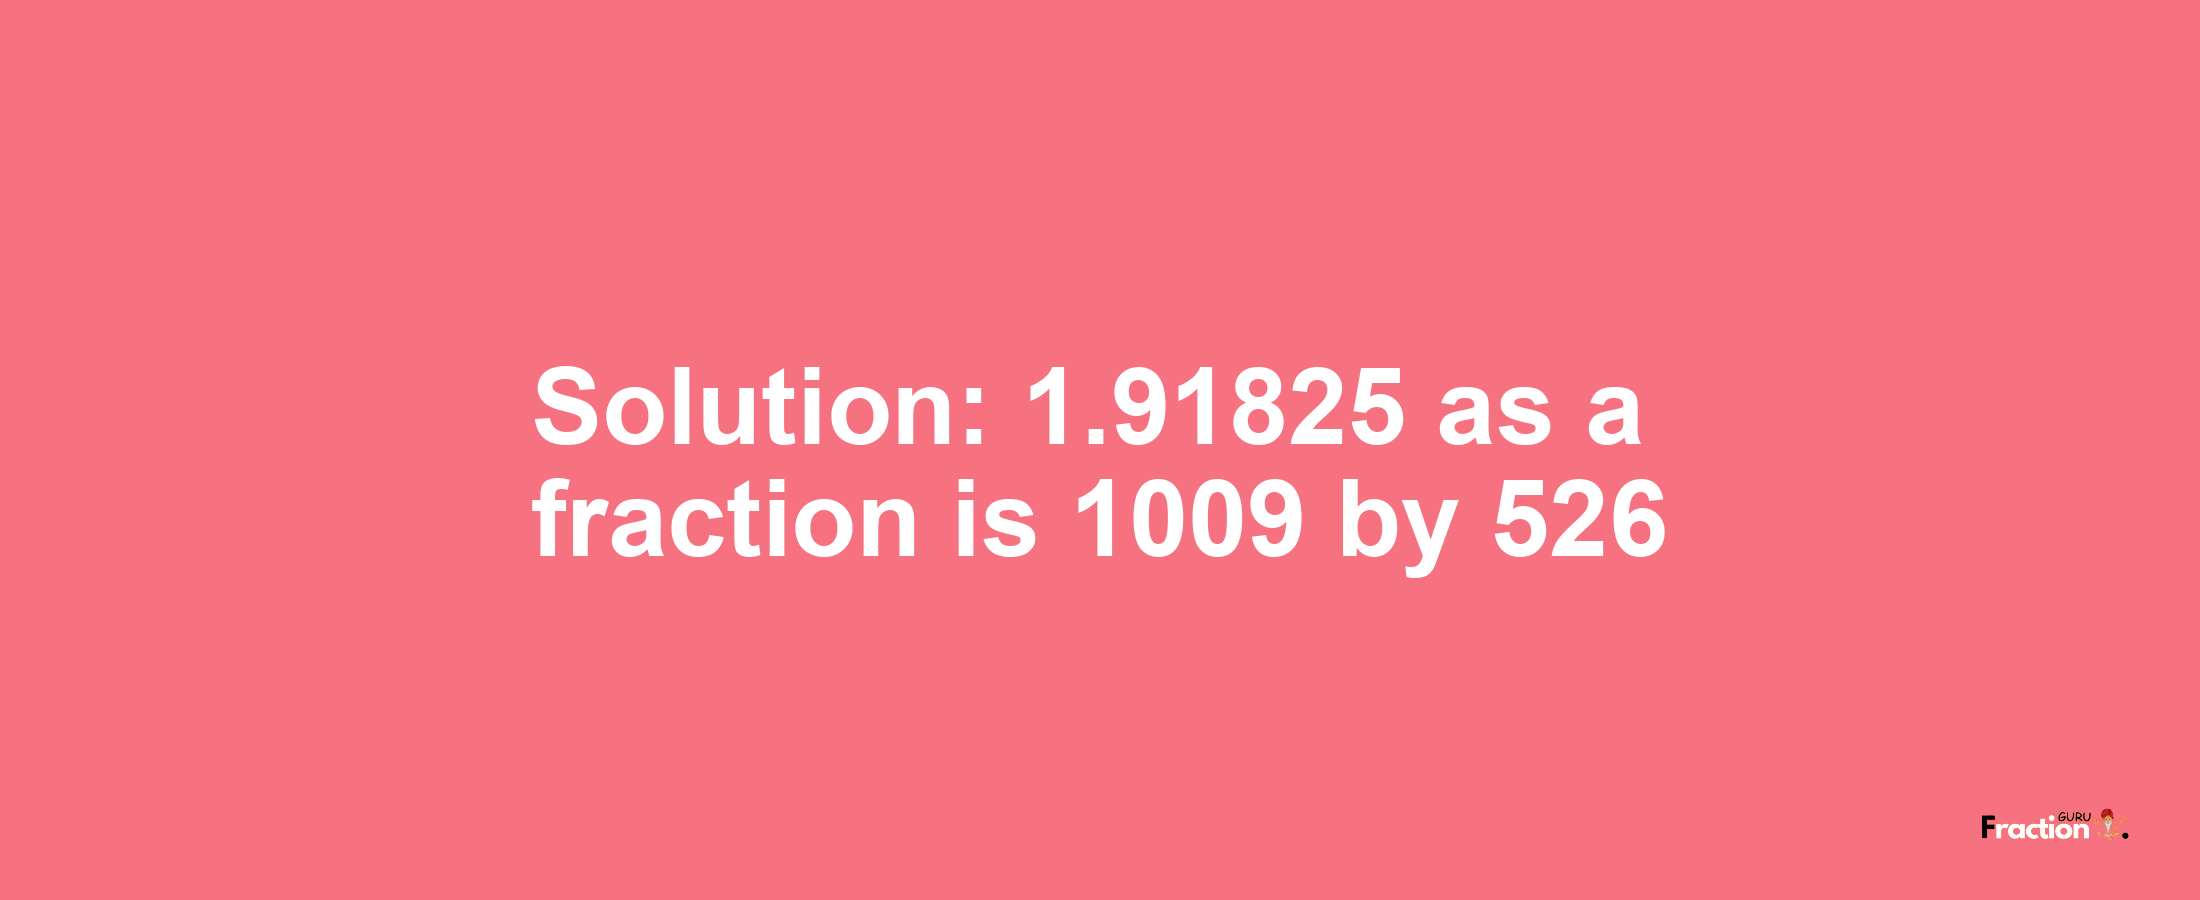 Solution:1.91825 as a fraction is 1009/526